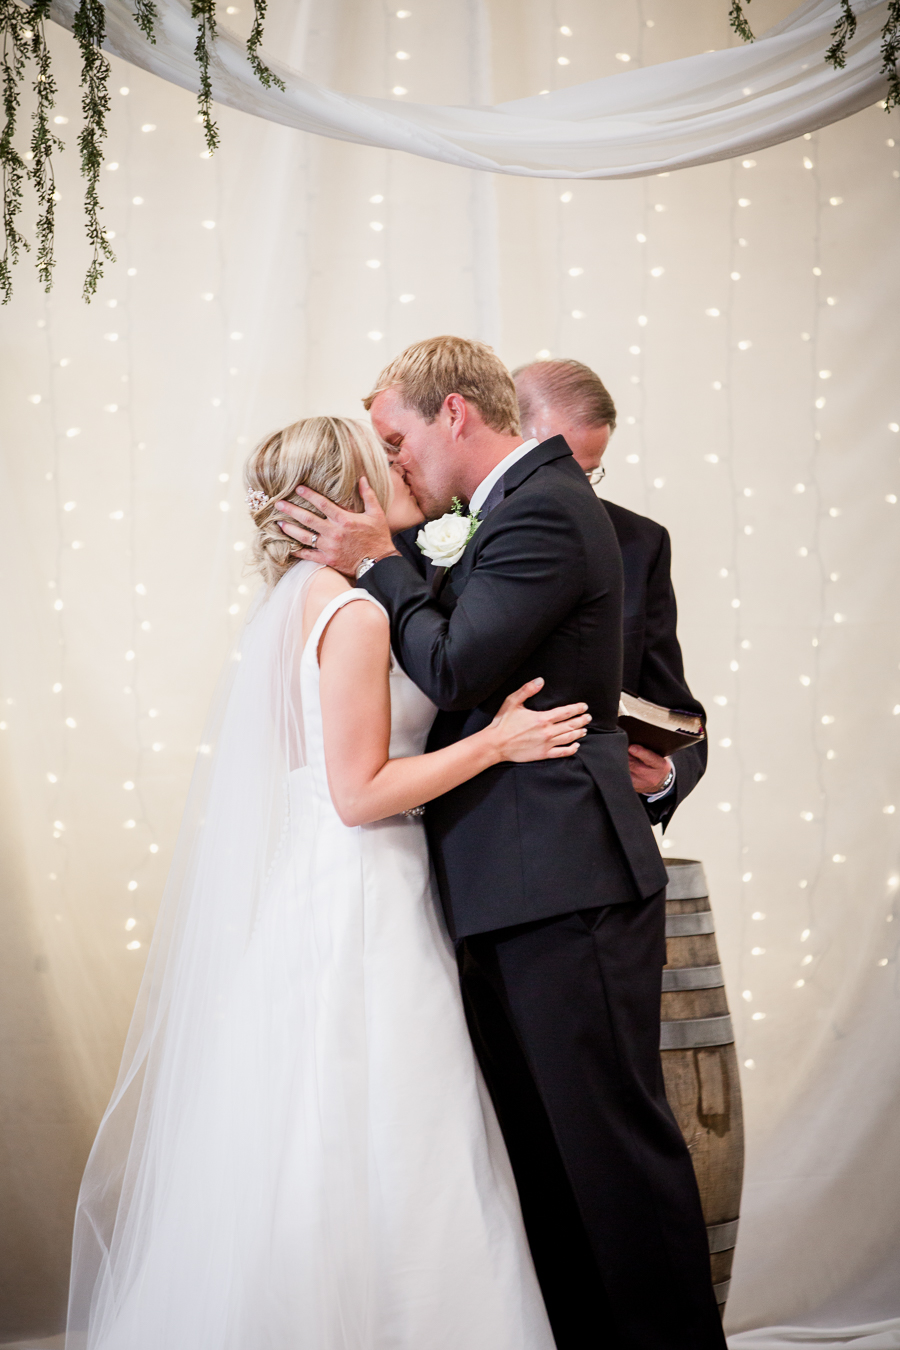 First kiss at this wedding at The Standard by Knoxville Wedding Photographer, Amanda May Photos.